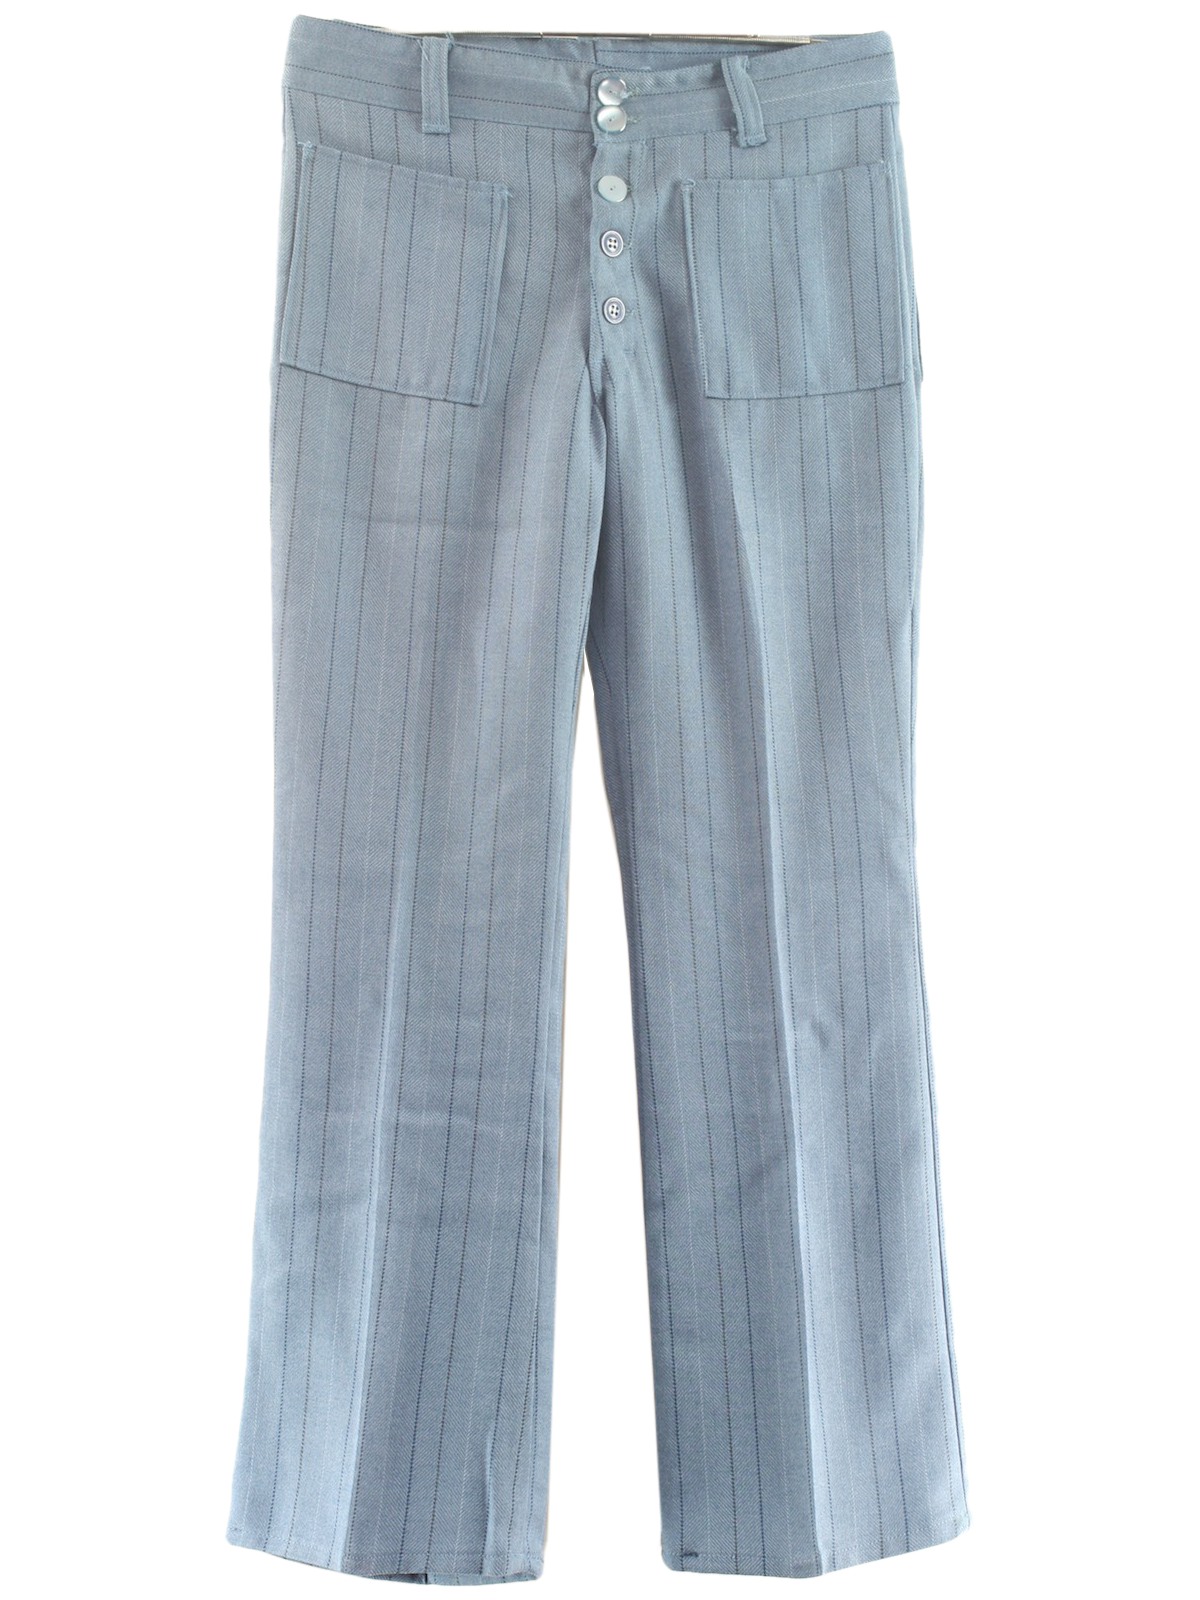 Home Sewn Seventies Vintage Flared Pants / Flares: 70s -Home Sewn- Mens ...